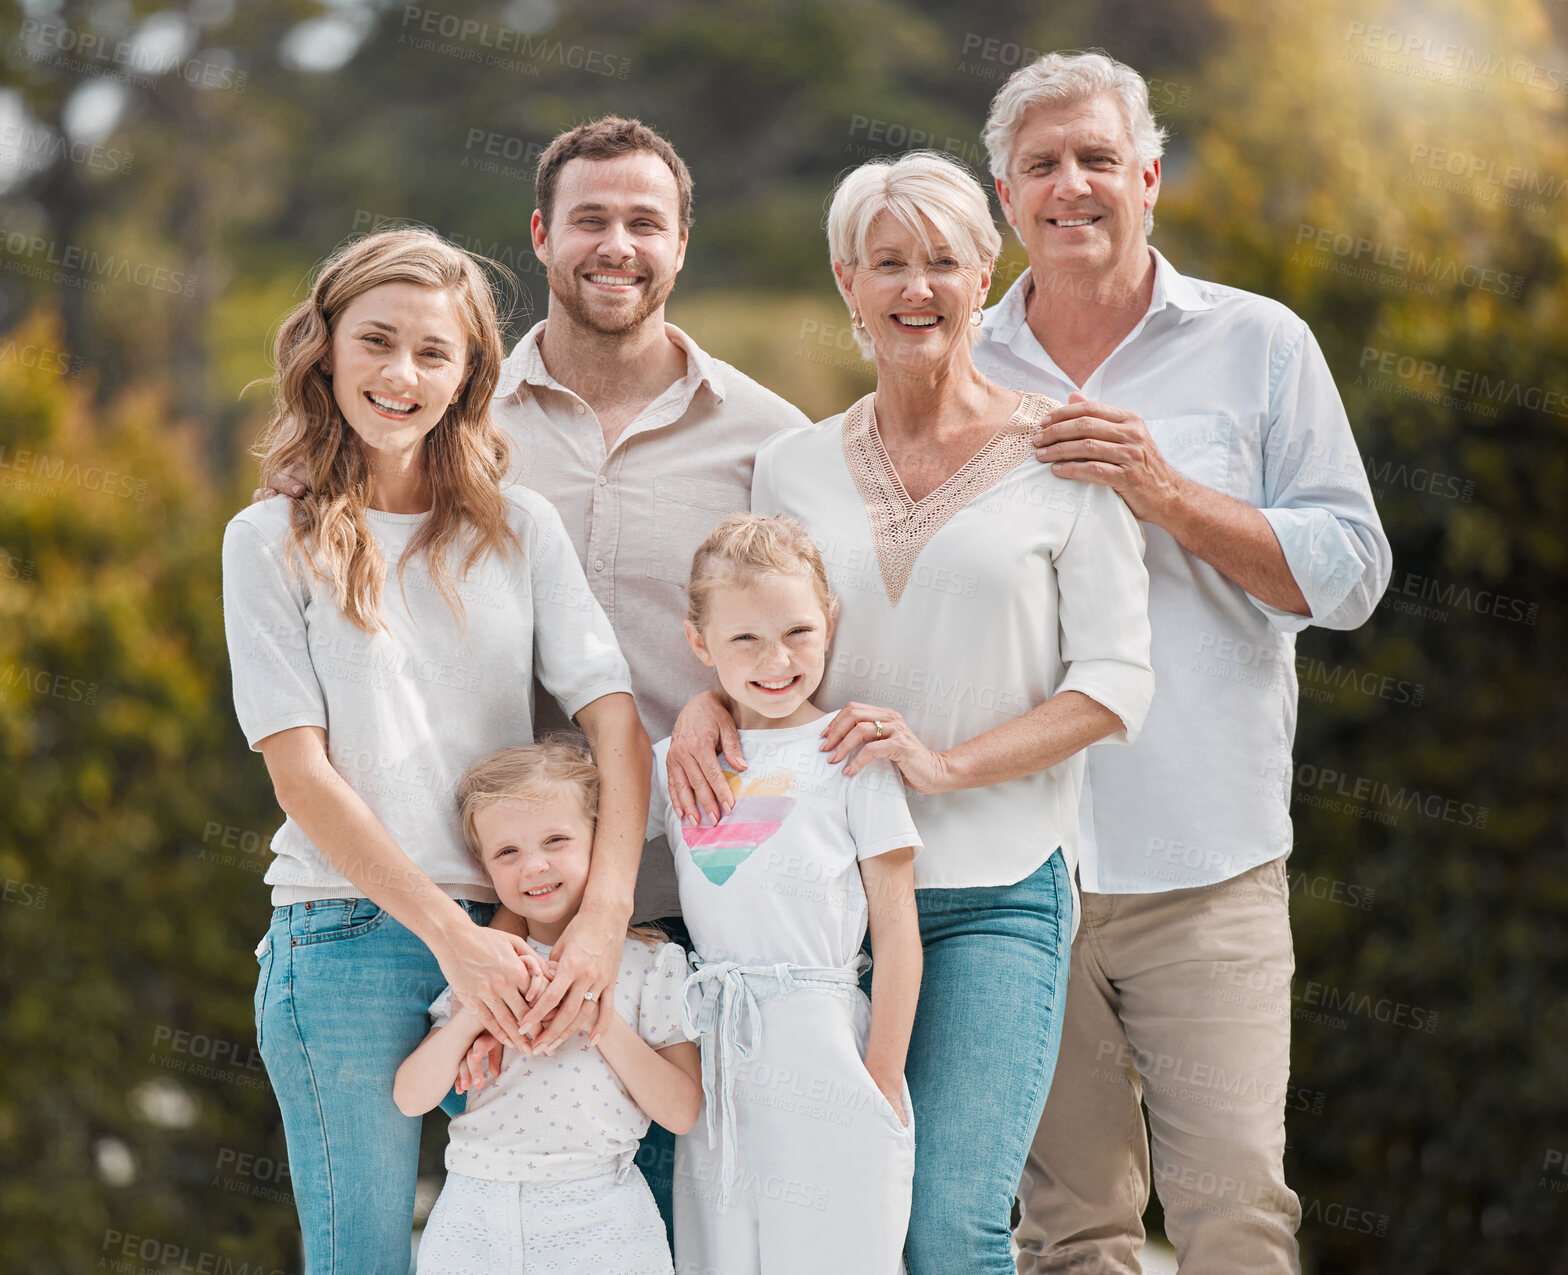 Buy stock photo Portrait of big family in park together with smile, grandparents and parents with kids in backyard. Nature, happiness and men, women and children in garden with love, support and outdoor bonding.